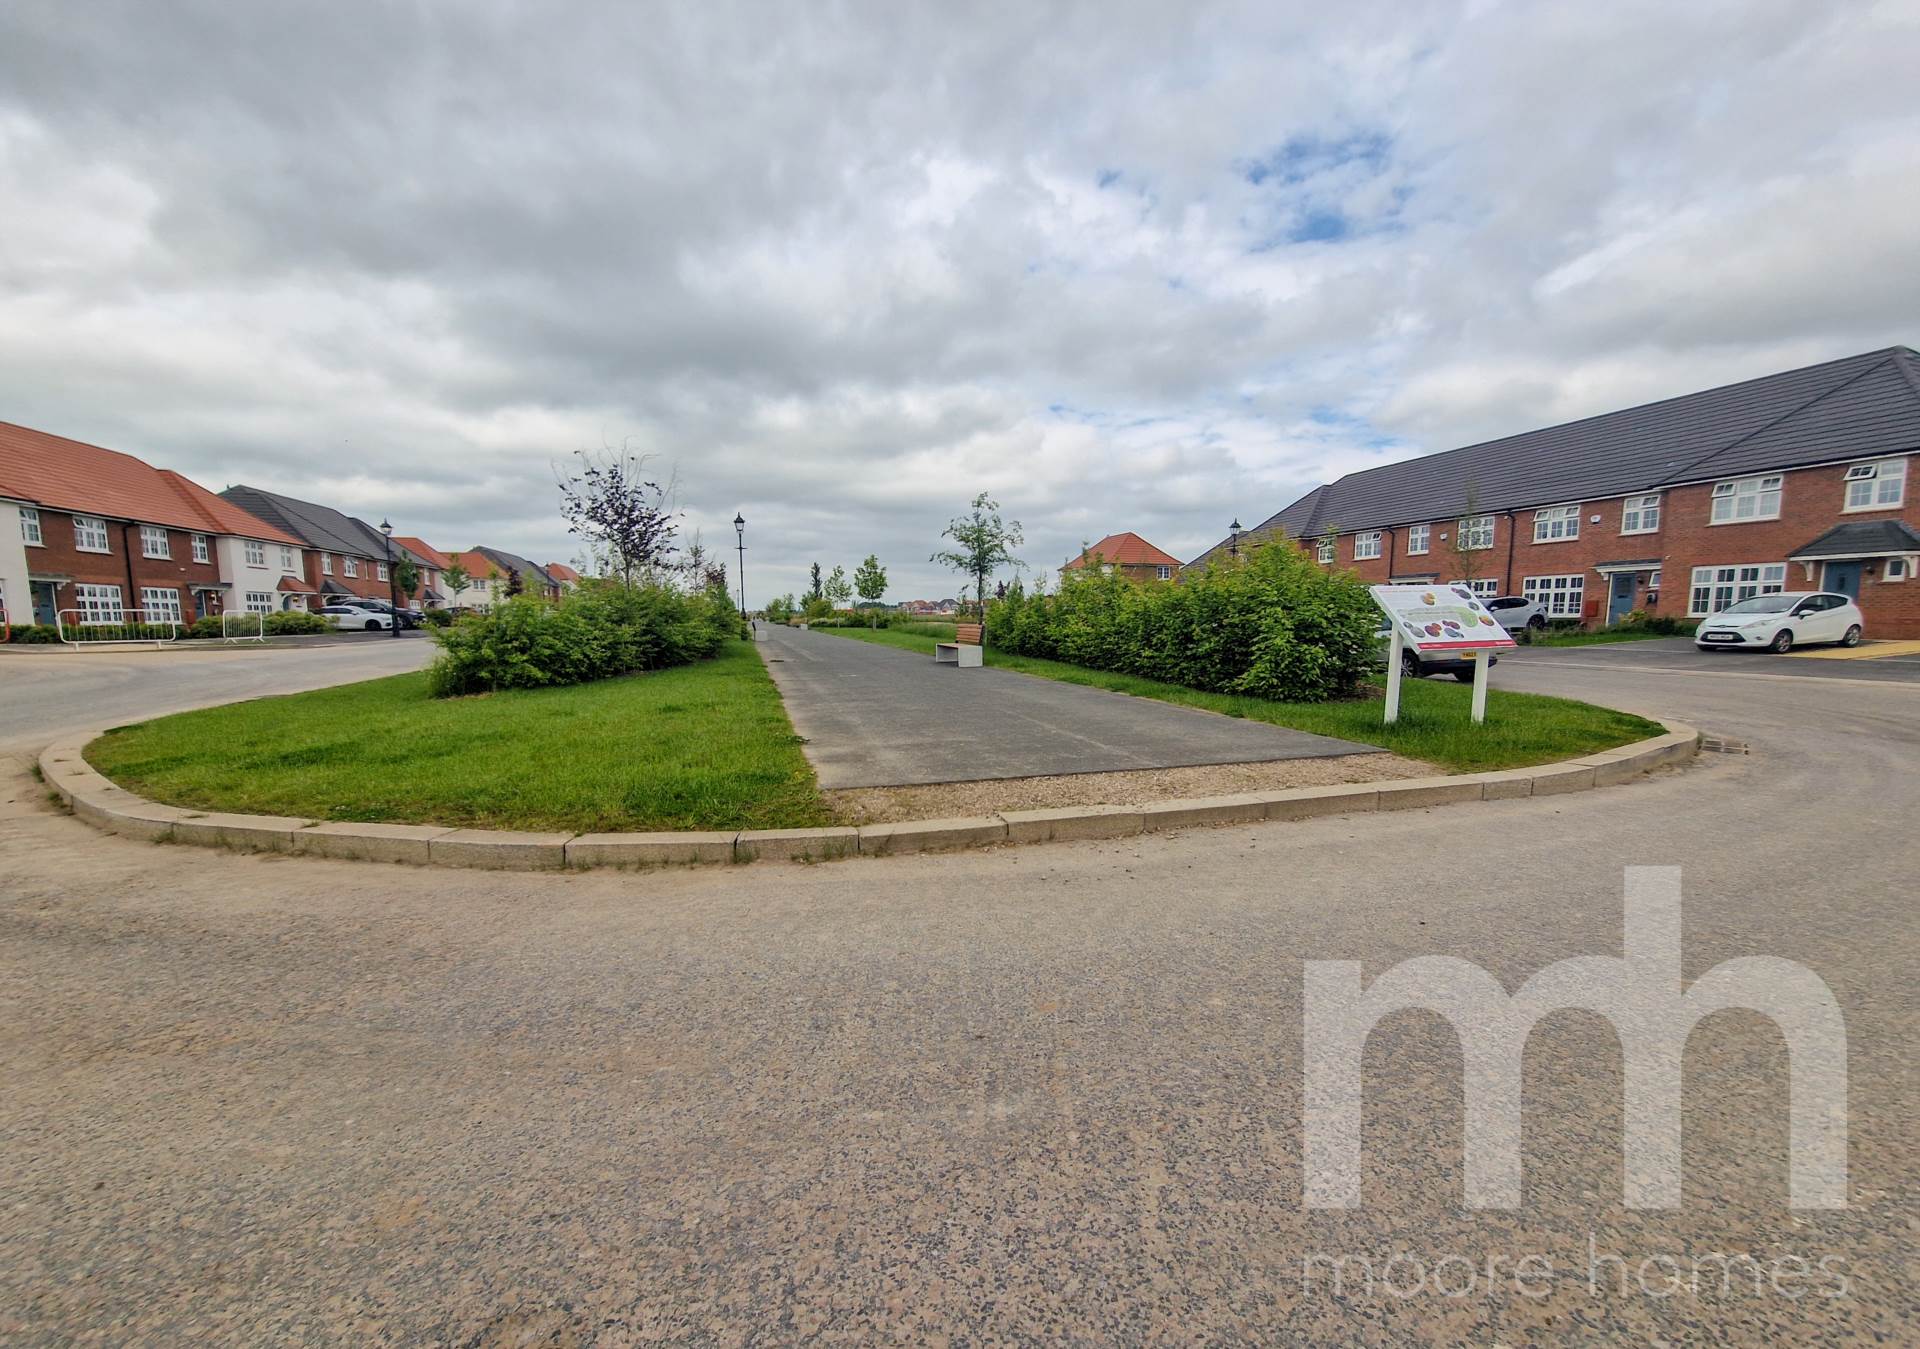 LOVELL AVENUE, Woodford SK7 1TB, Image 24